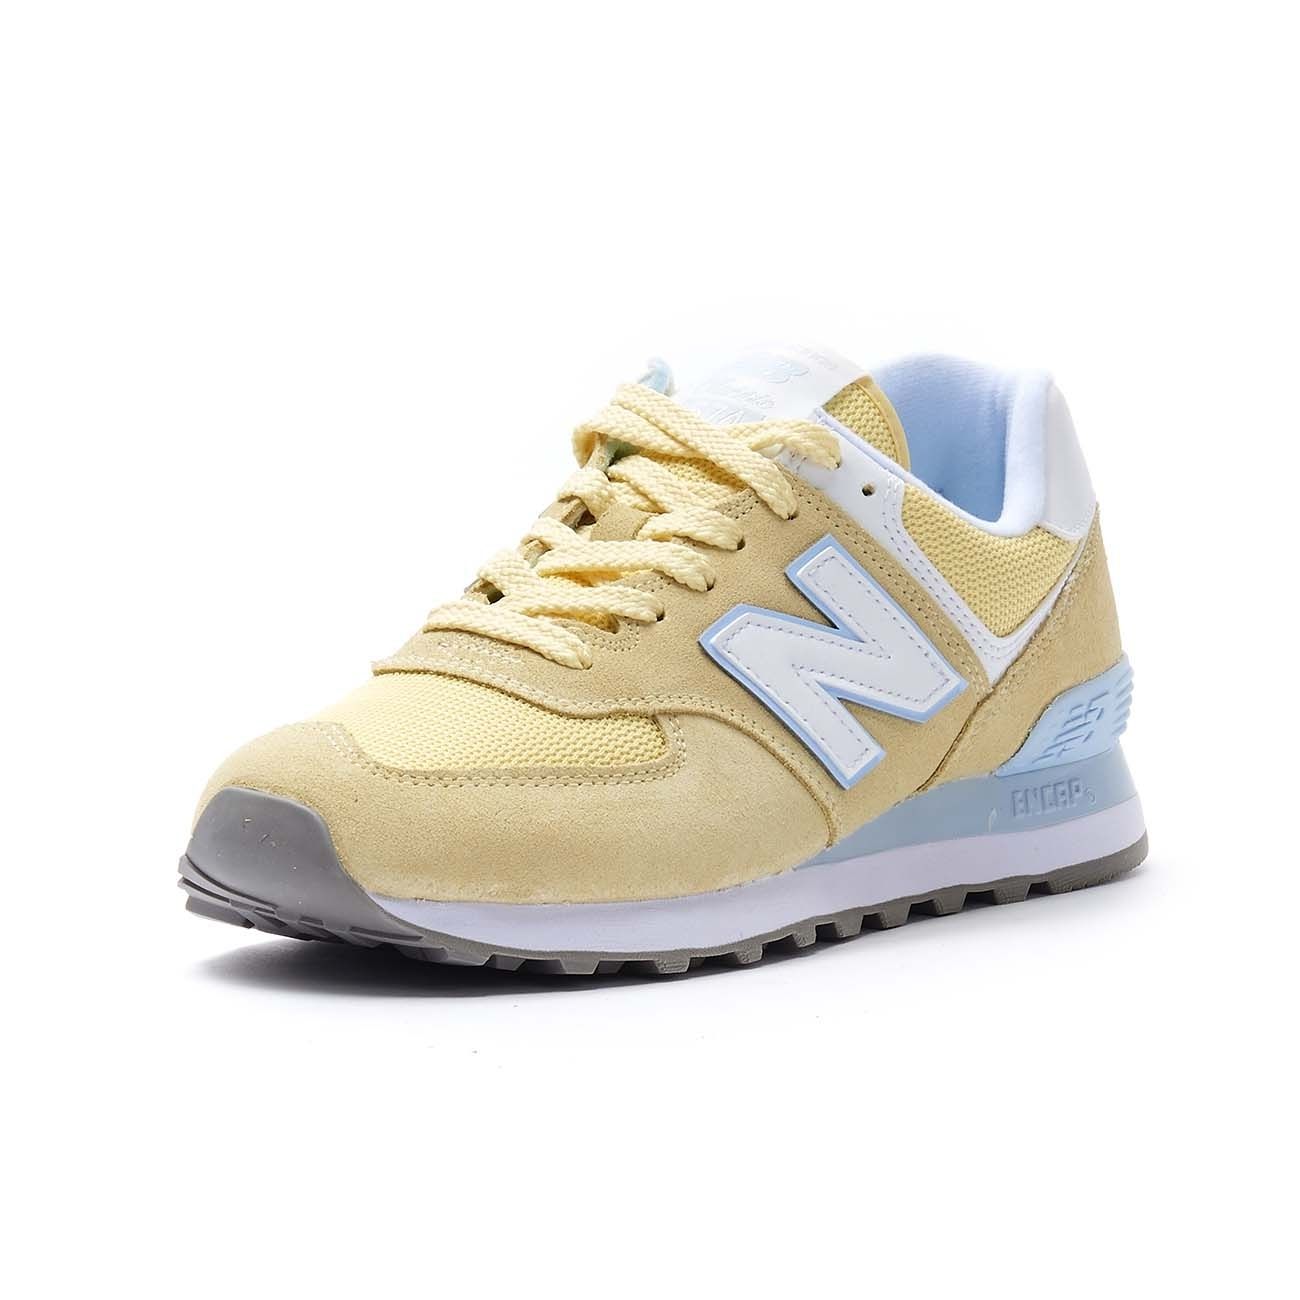 NEW BALANCE SNEAKERS 574 LIFESTYLE SUEDE MESH Woman Sun glow ...